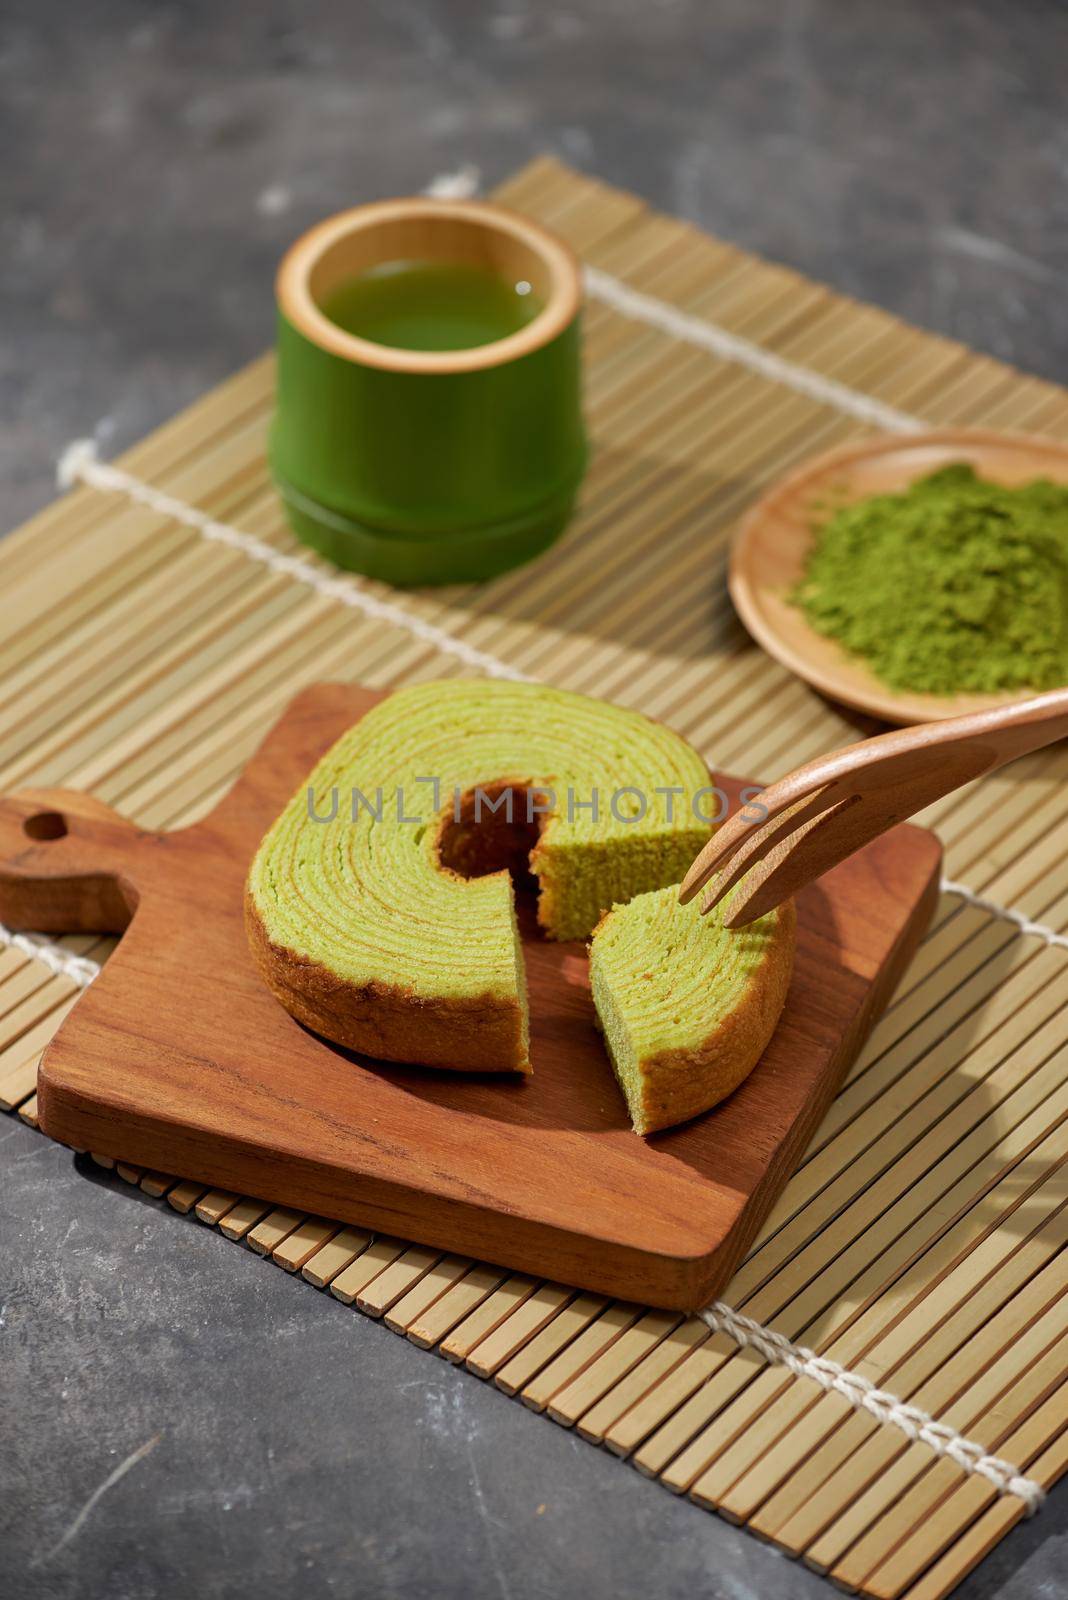 Matcha green tea latte in a cup and tea ceremony utensils with German cake. Copy space